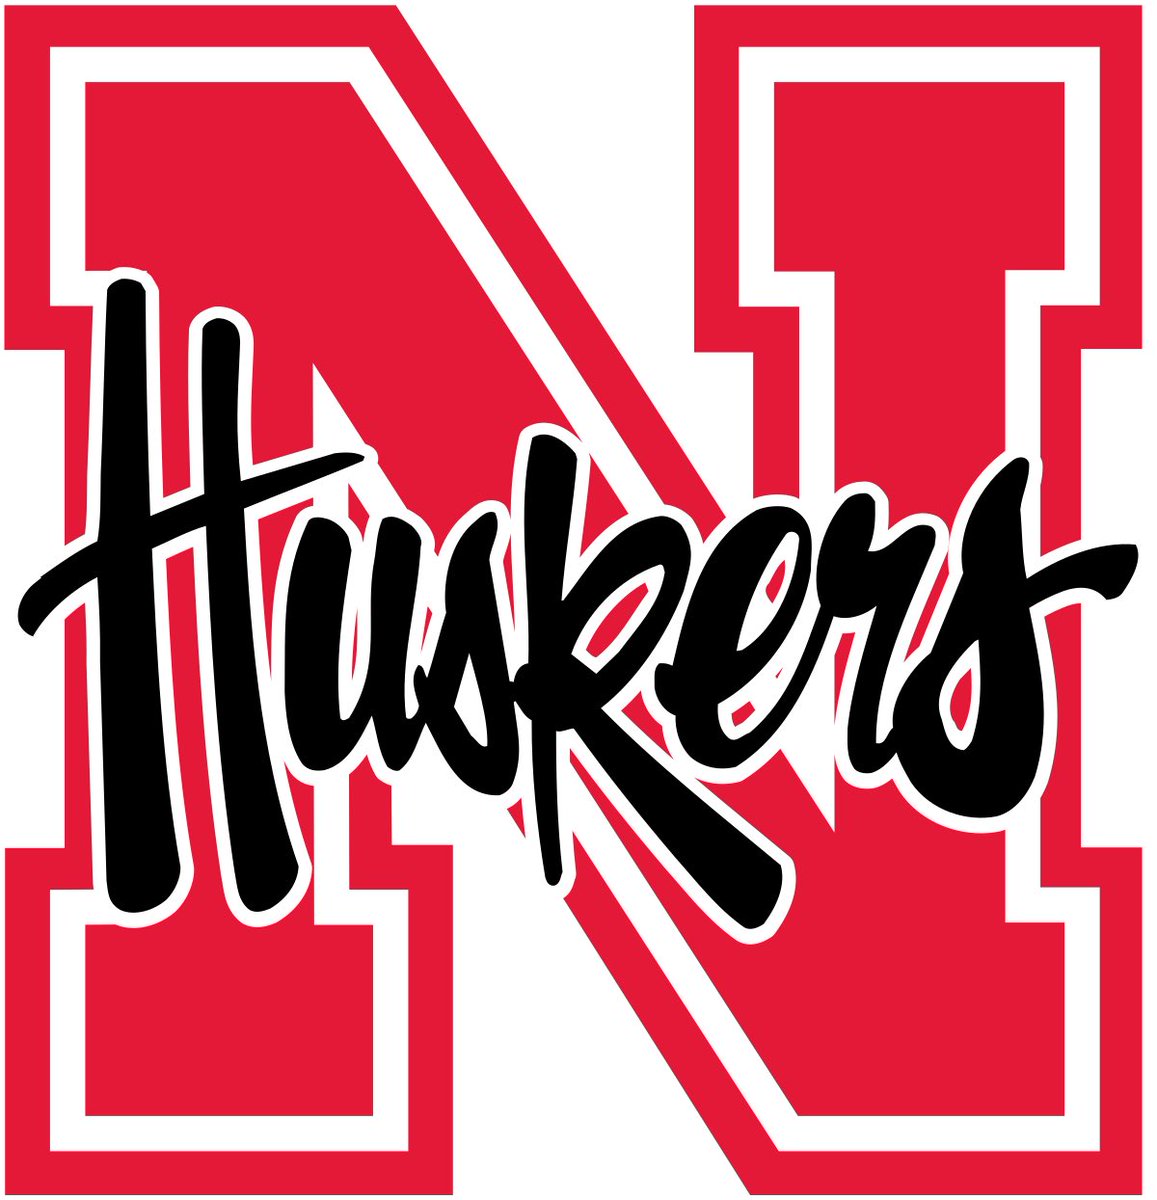 Blessed to have received my first graduate transfer offer from @coach_frost and @TMossbrucker at the university of Nebraska. Can’t wait to visit next week! #GBR. @coolc815